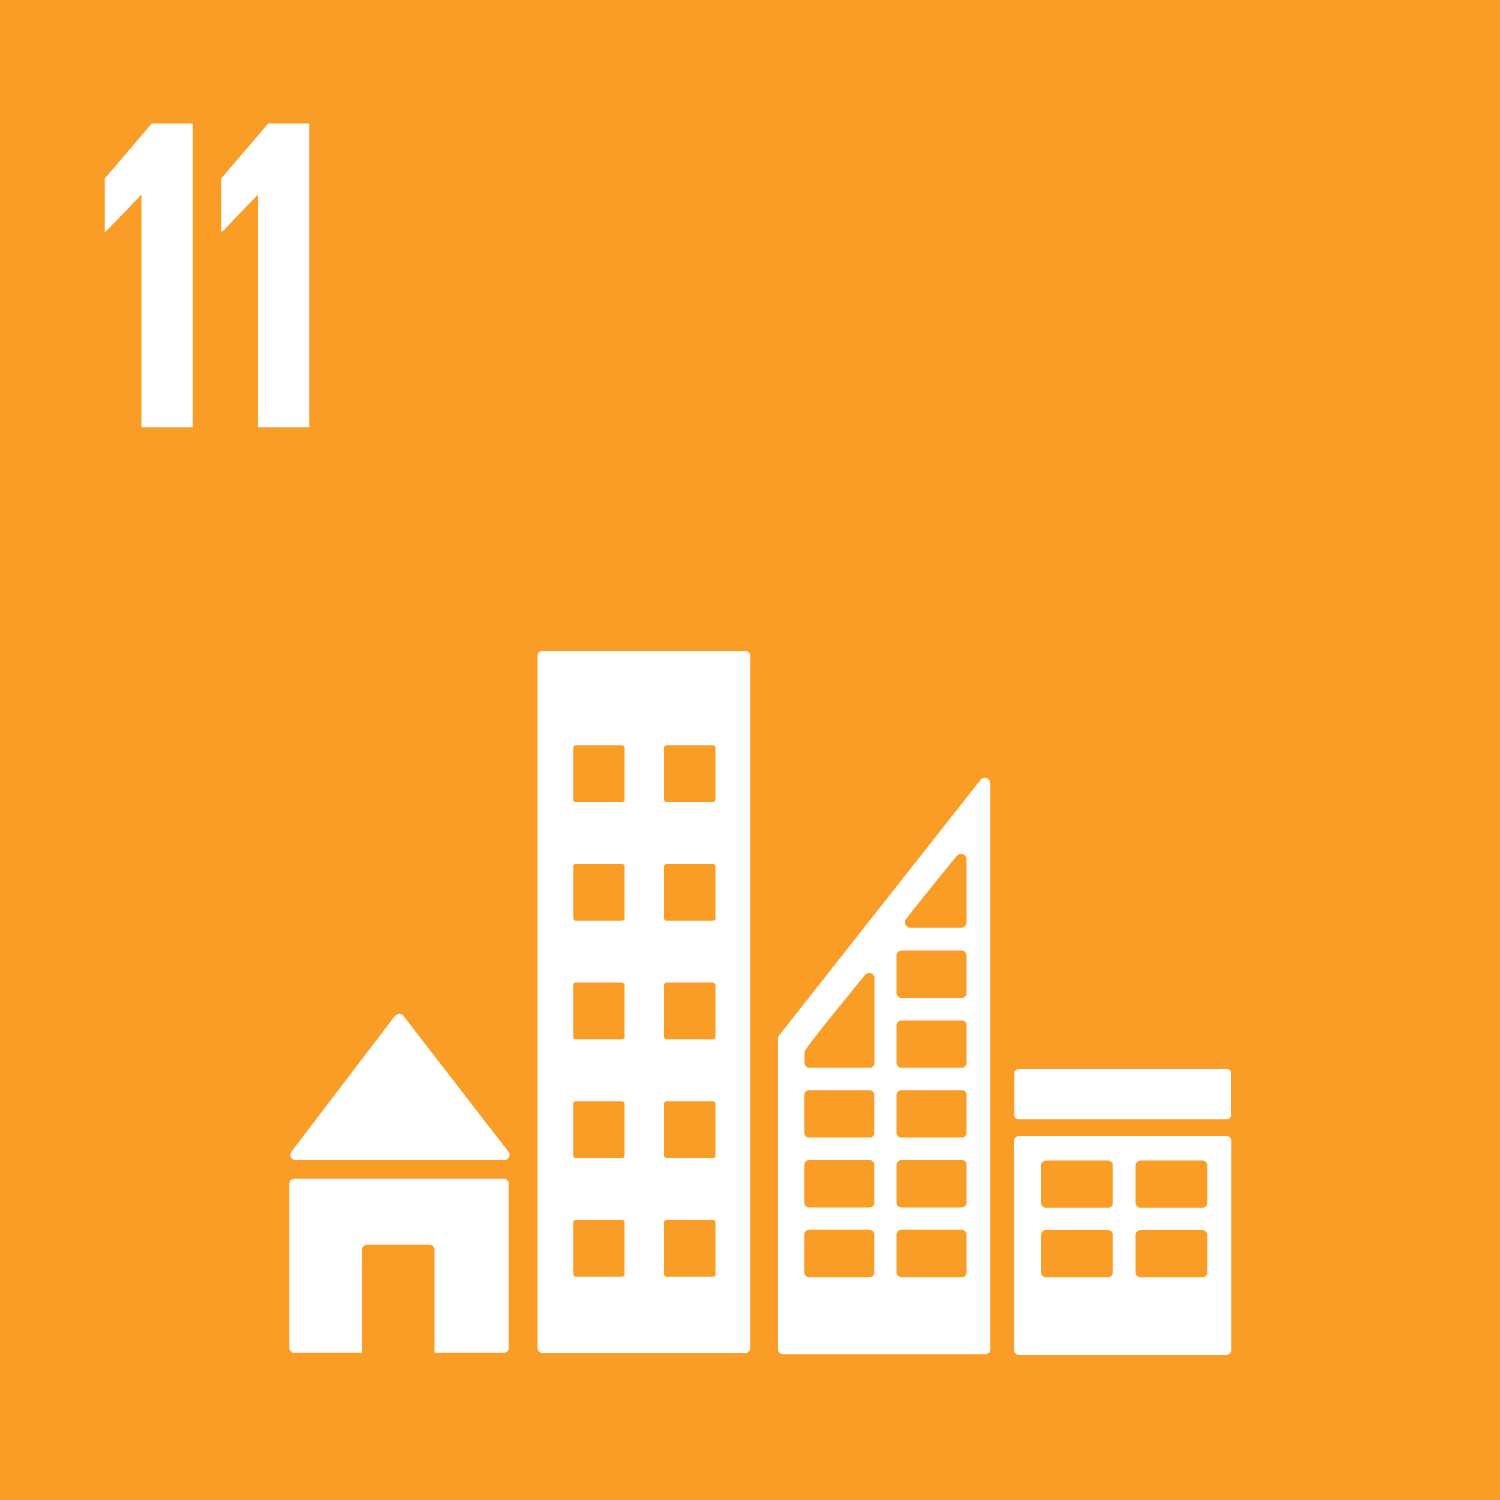 SDG 11. Sustainable cities and communities.